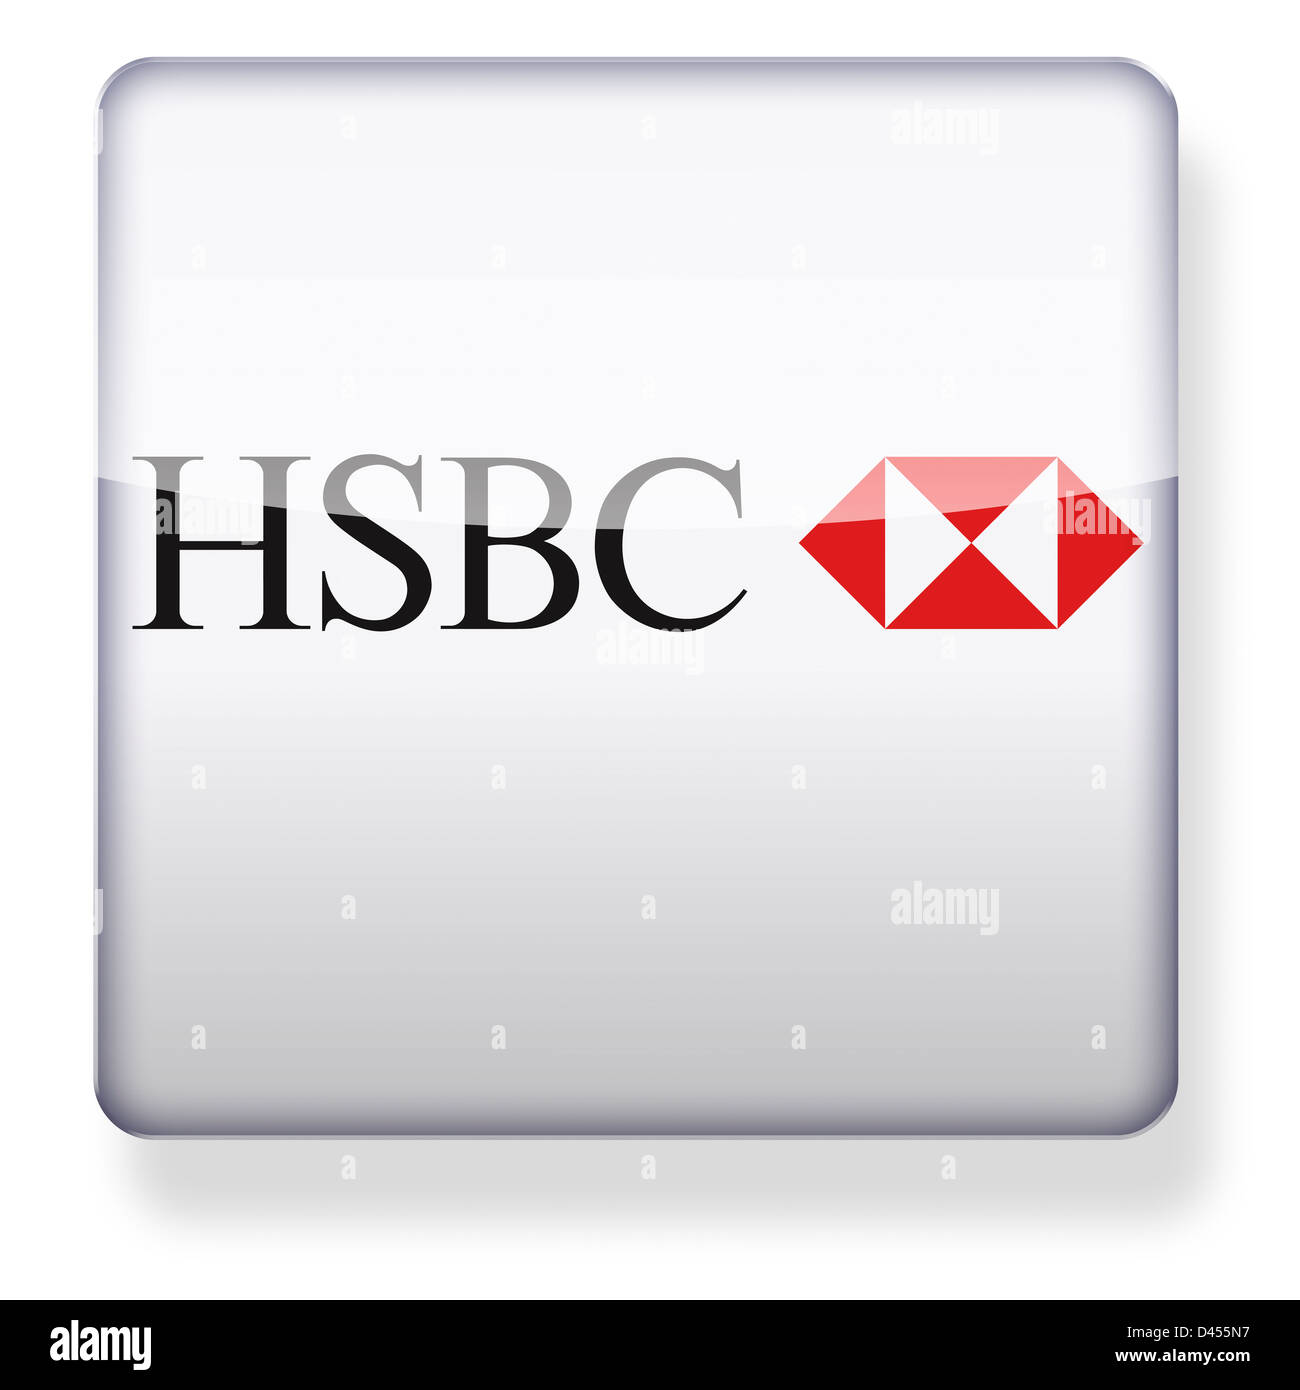 HSBC logo as an app icon. Clipping path included. Stock Photo